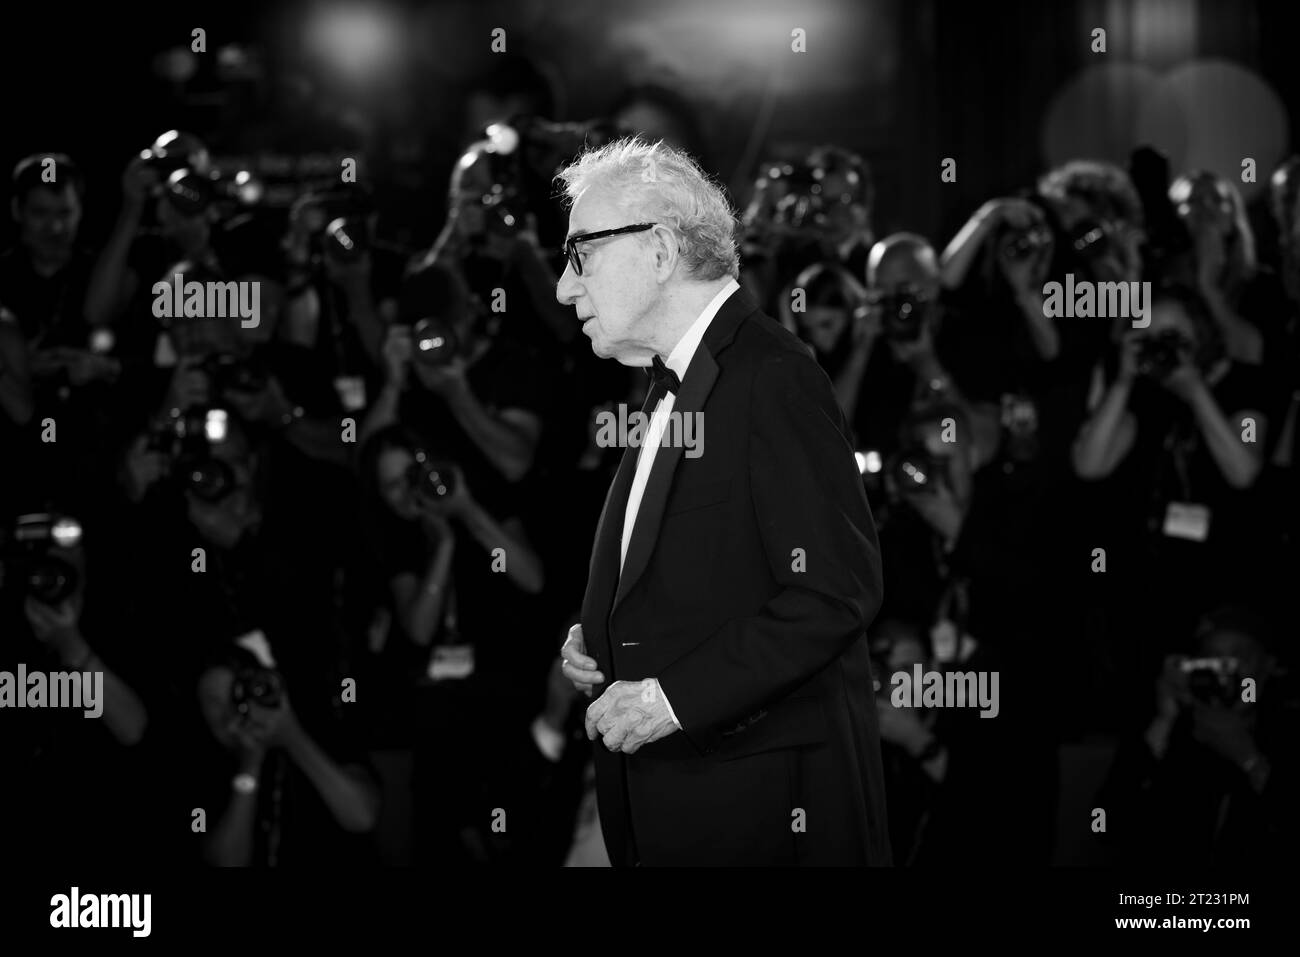 VENICE, ITALY - SEPTEMBER 04: Director Woody Allen attends the red carpet for the movie 'Coup De Chance' at the 80th Venice International Film Festiva Stock Photo